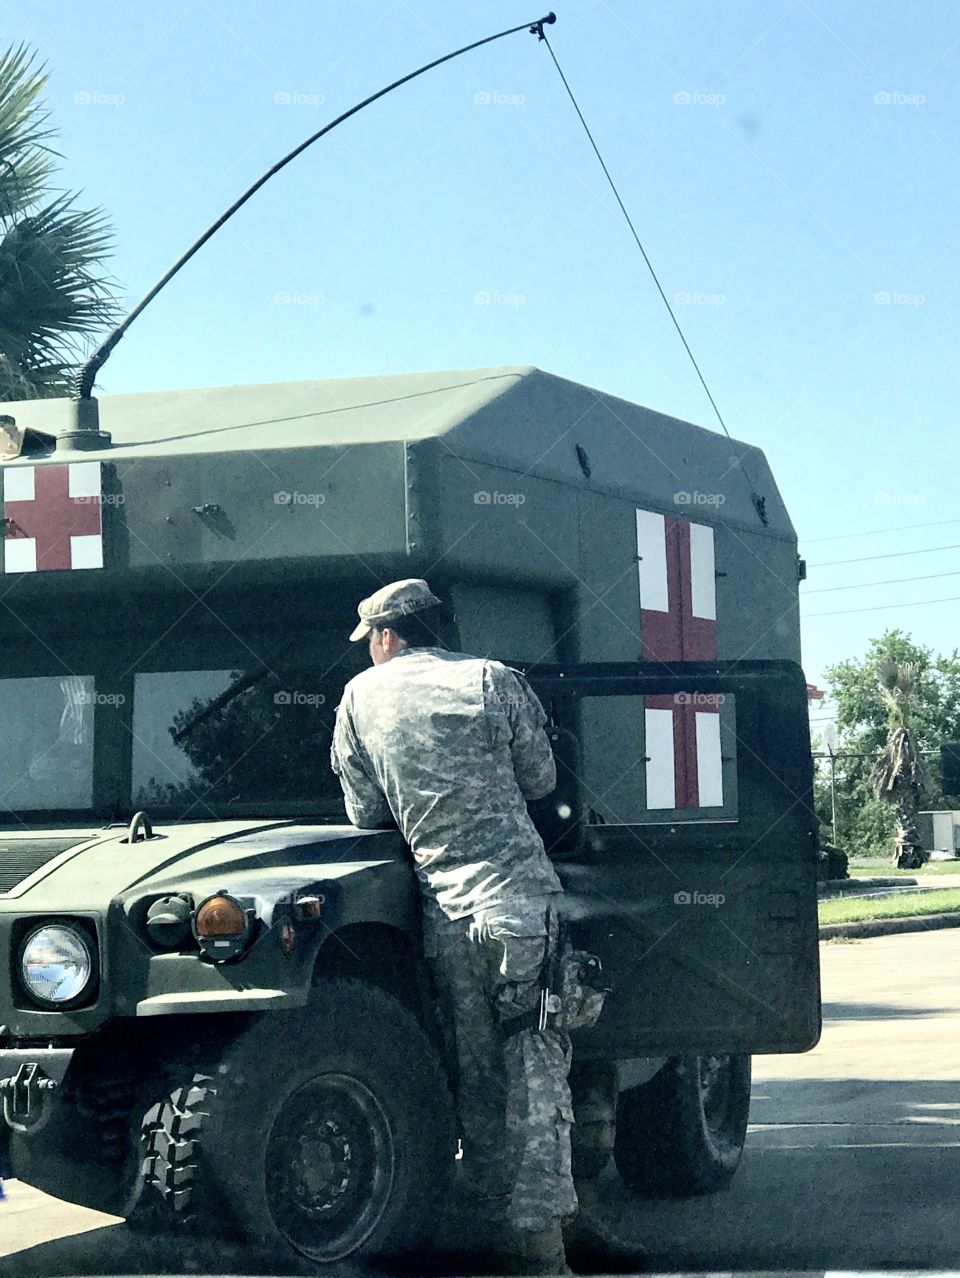 A soldier takes a break from Hurricane Harvey relief efforts